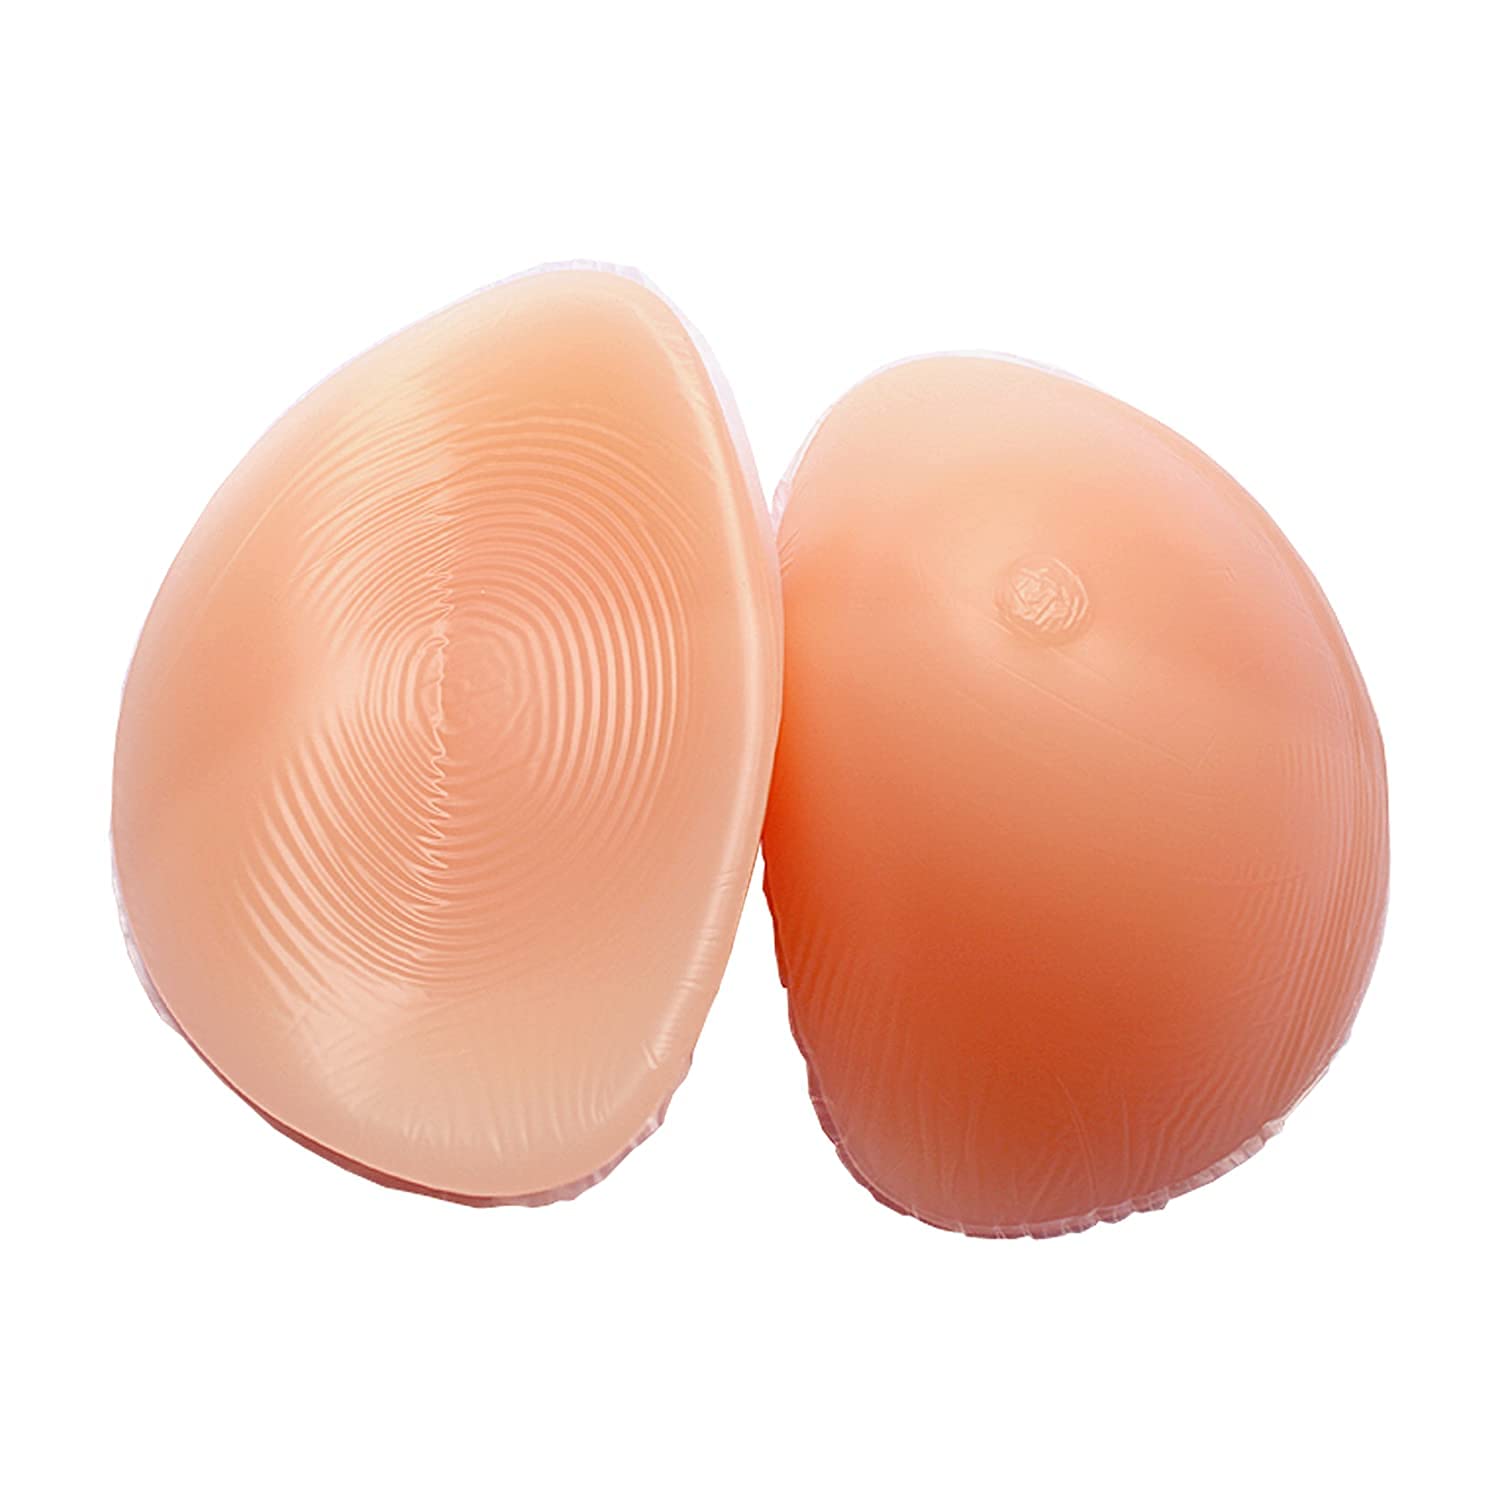 Silicone Bra Inserts to Enhance Breast Size - Silicone Breast Enhancer with Original Look Medium Size